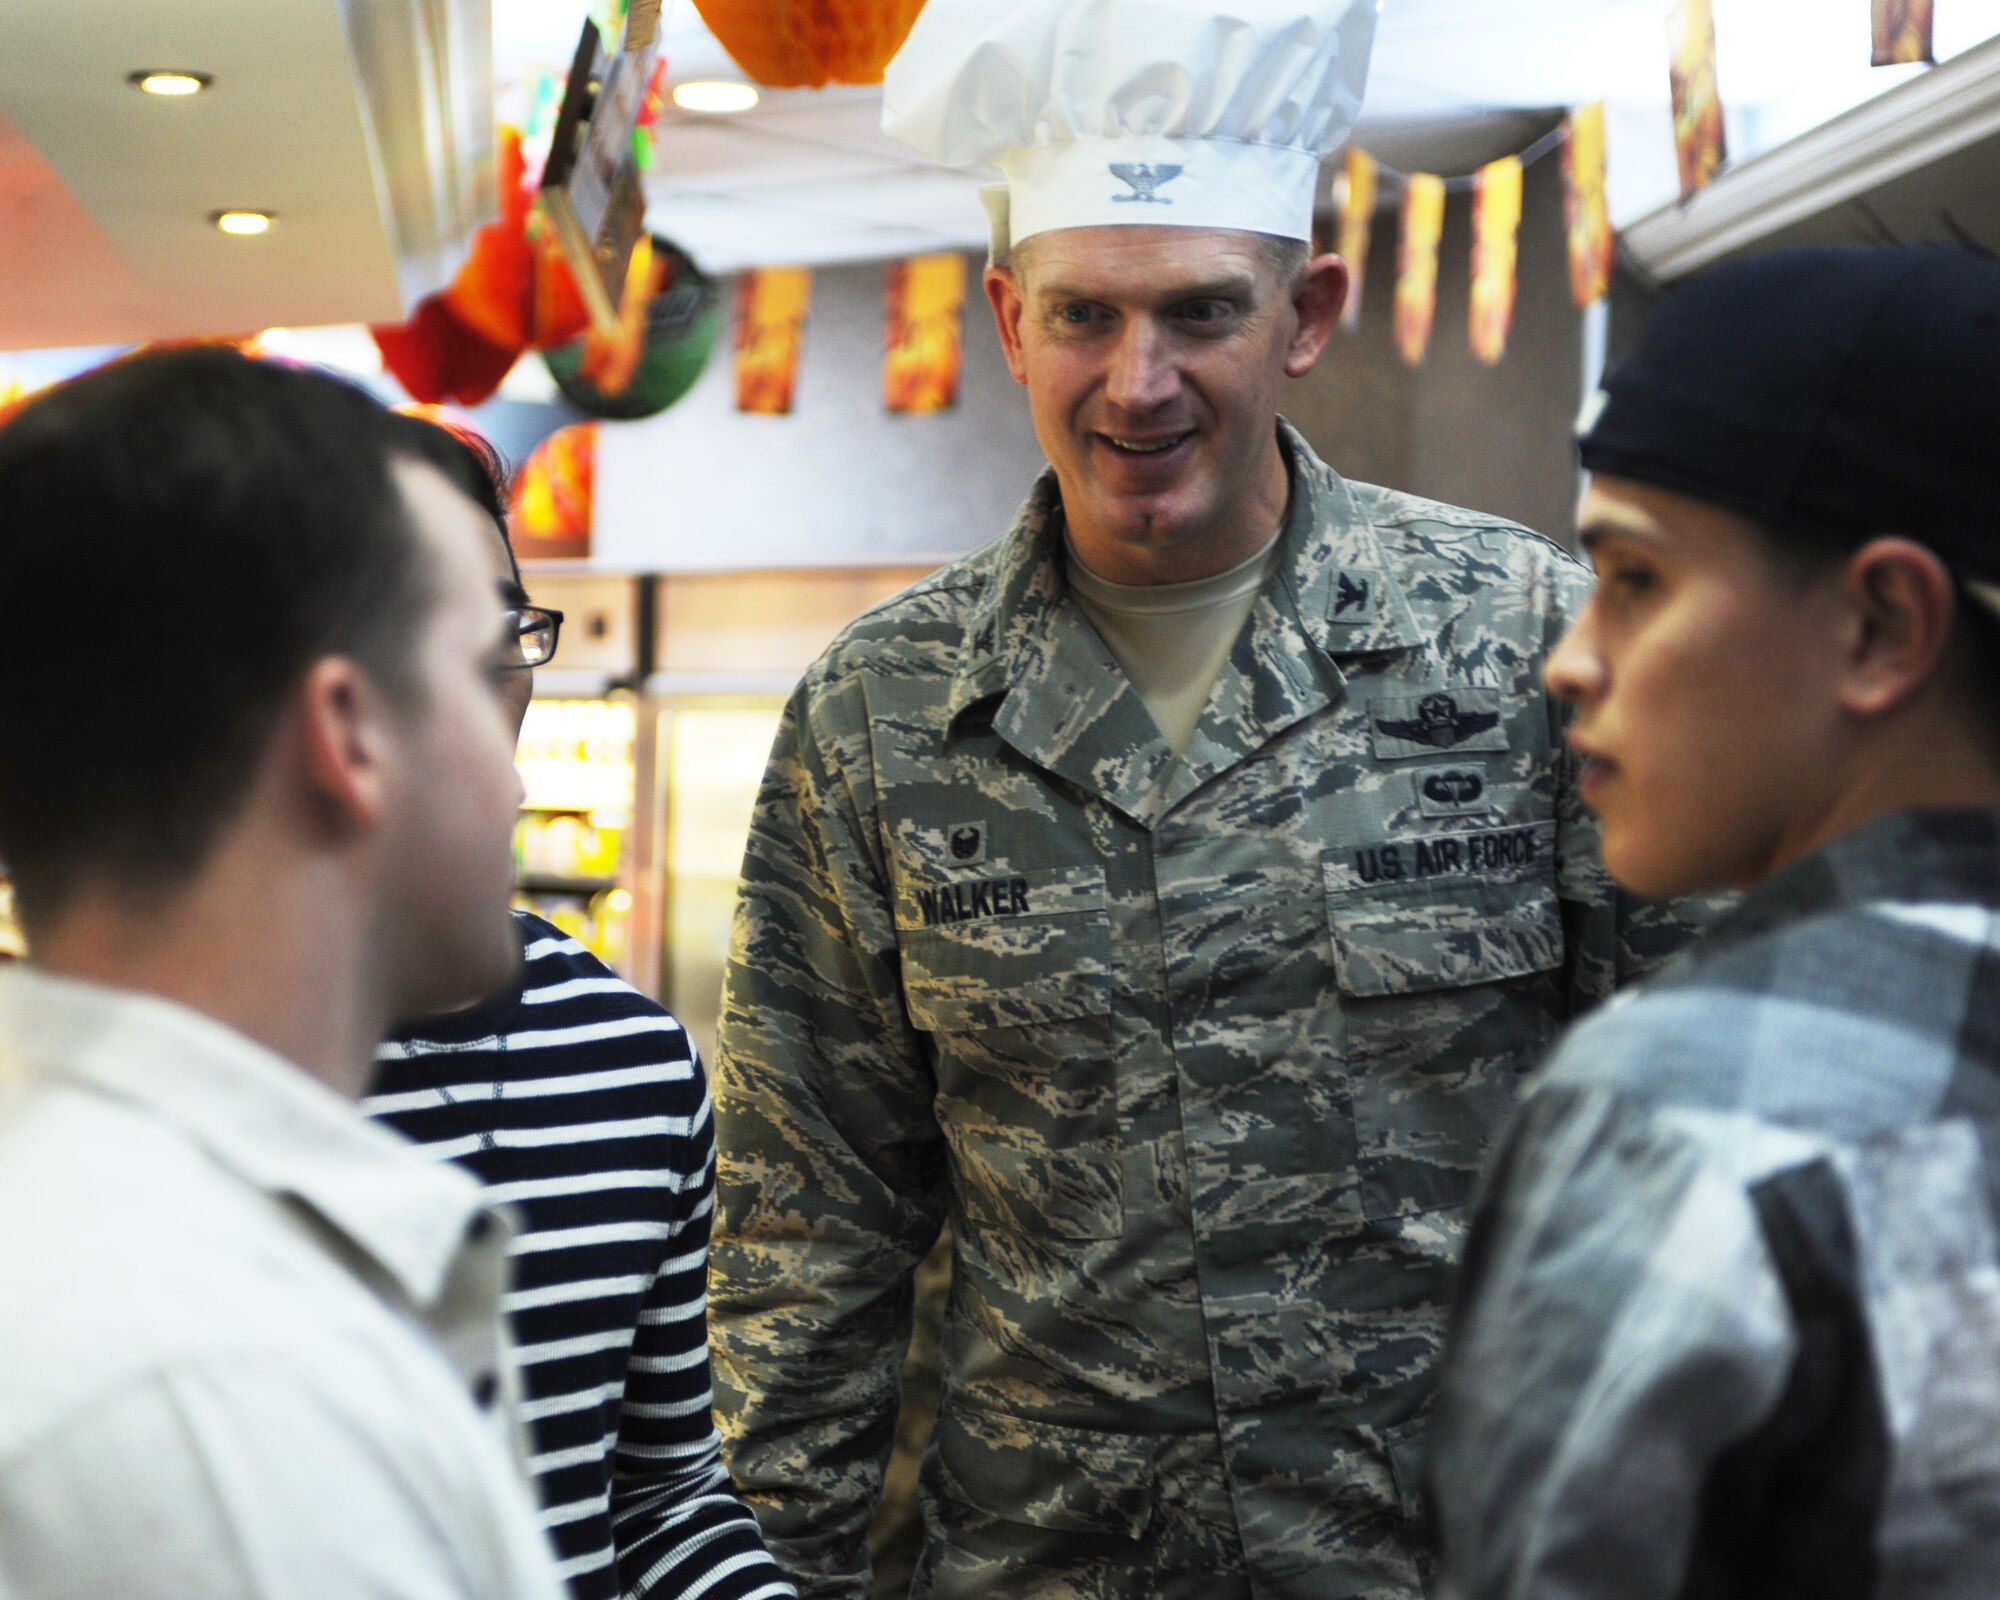 Col. John Walker, 39th Air Base Wing commander, greets Airmen during their Thanksgiving Day meal held by the Sultan’s Inn dining facility Nov. 26, 2015, at Incirlik Air Force Base, Turkey. Dining facility workers prepared a traditional Thanksgiving meal and base leaders and their families served permanent party and deployed Airmen for lunch. (U.S. Air Force photo by Airman 1st Class Daniel Lile/Released)